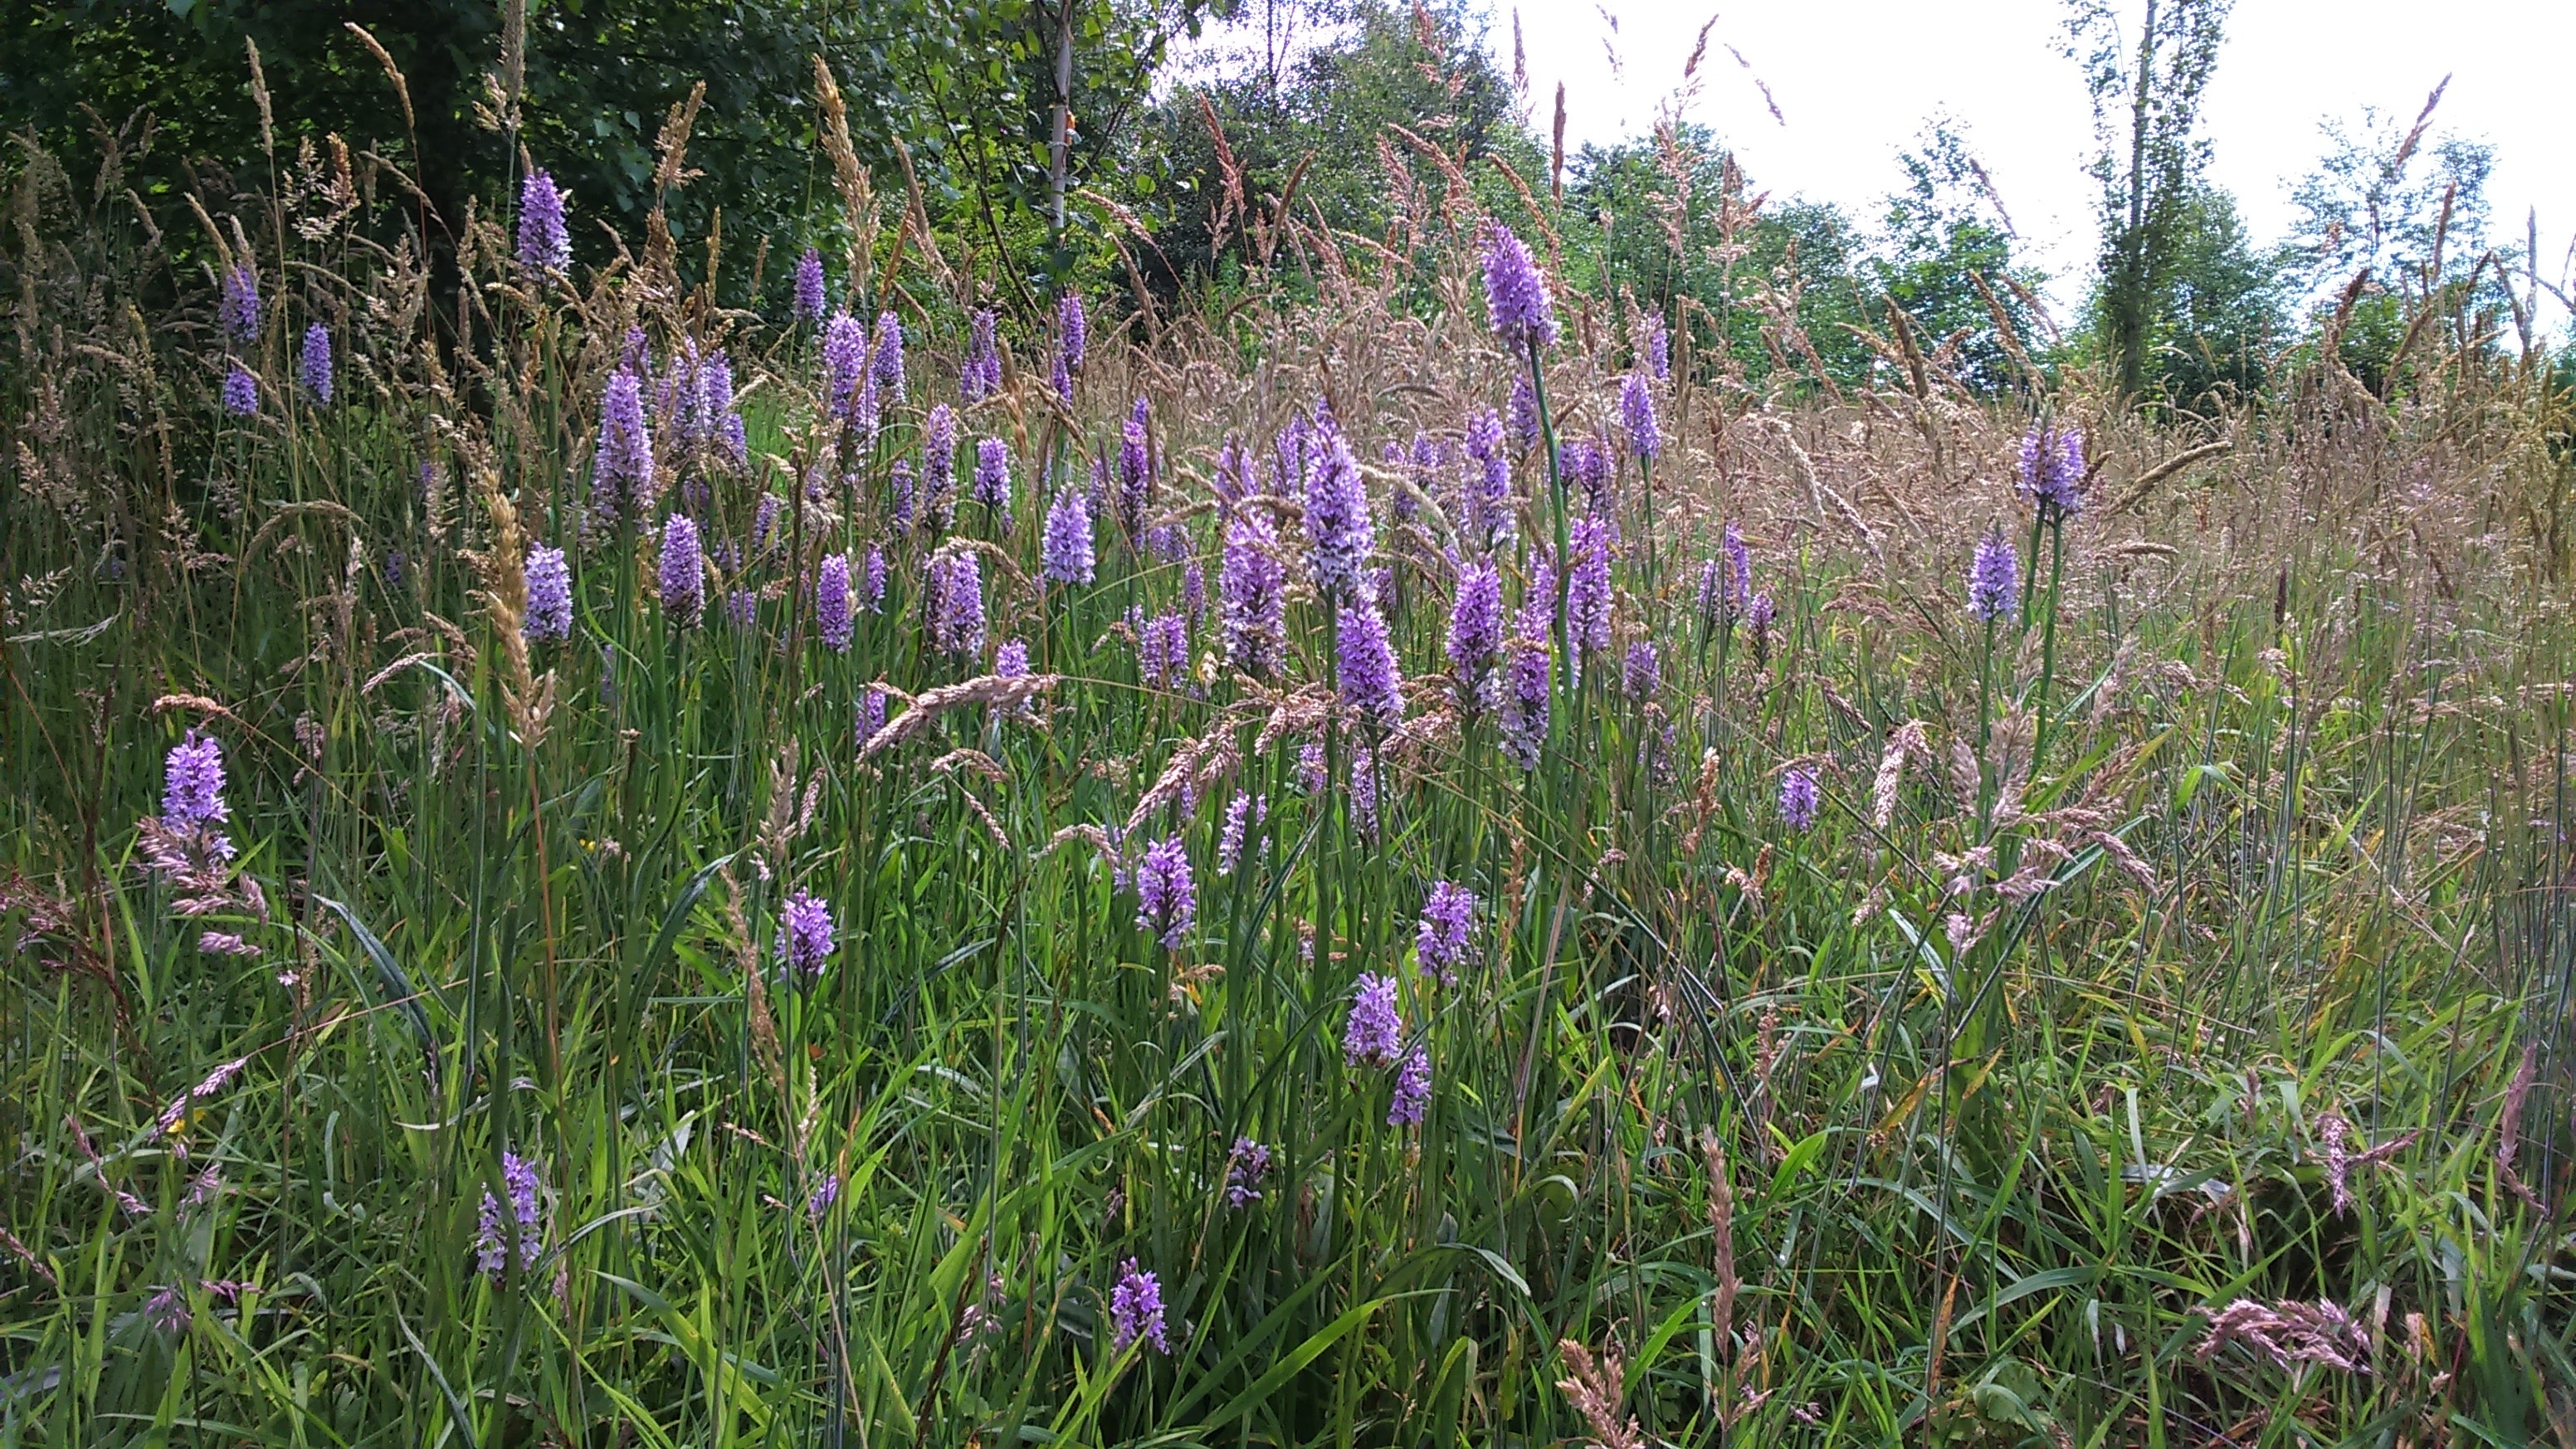 Wild orchids in Rotary Wood, Harrogate in 2017